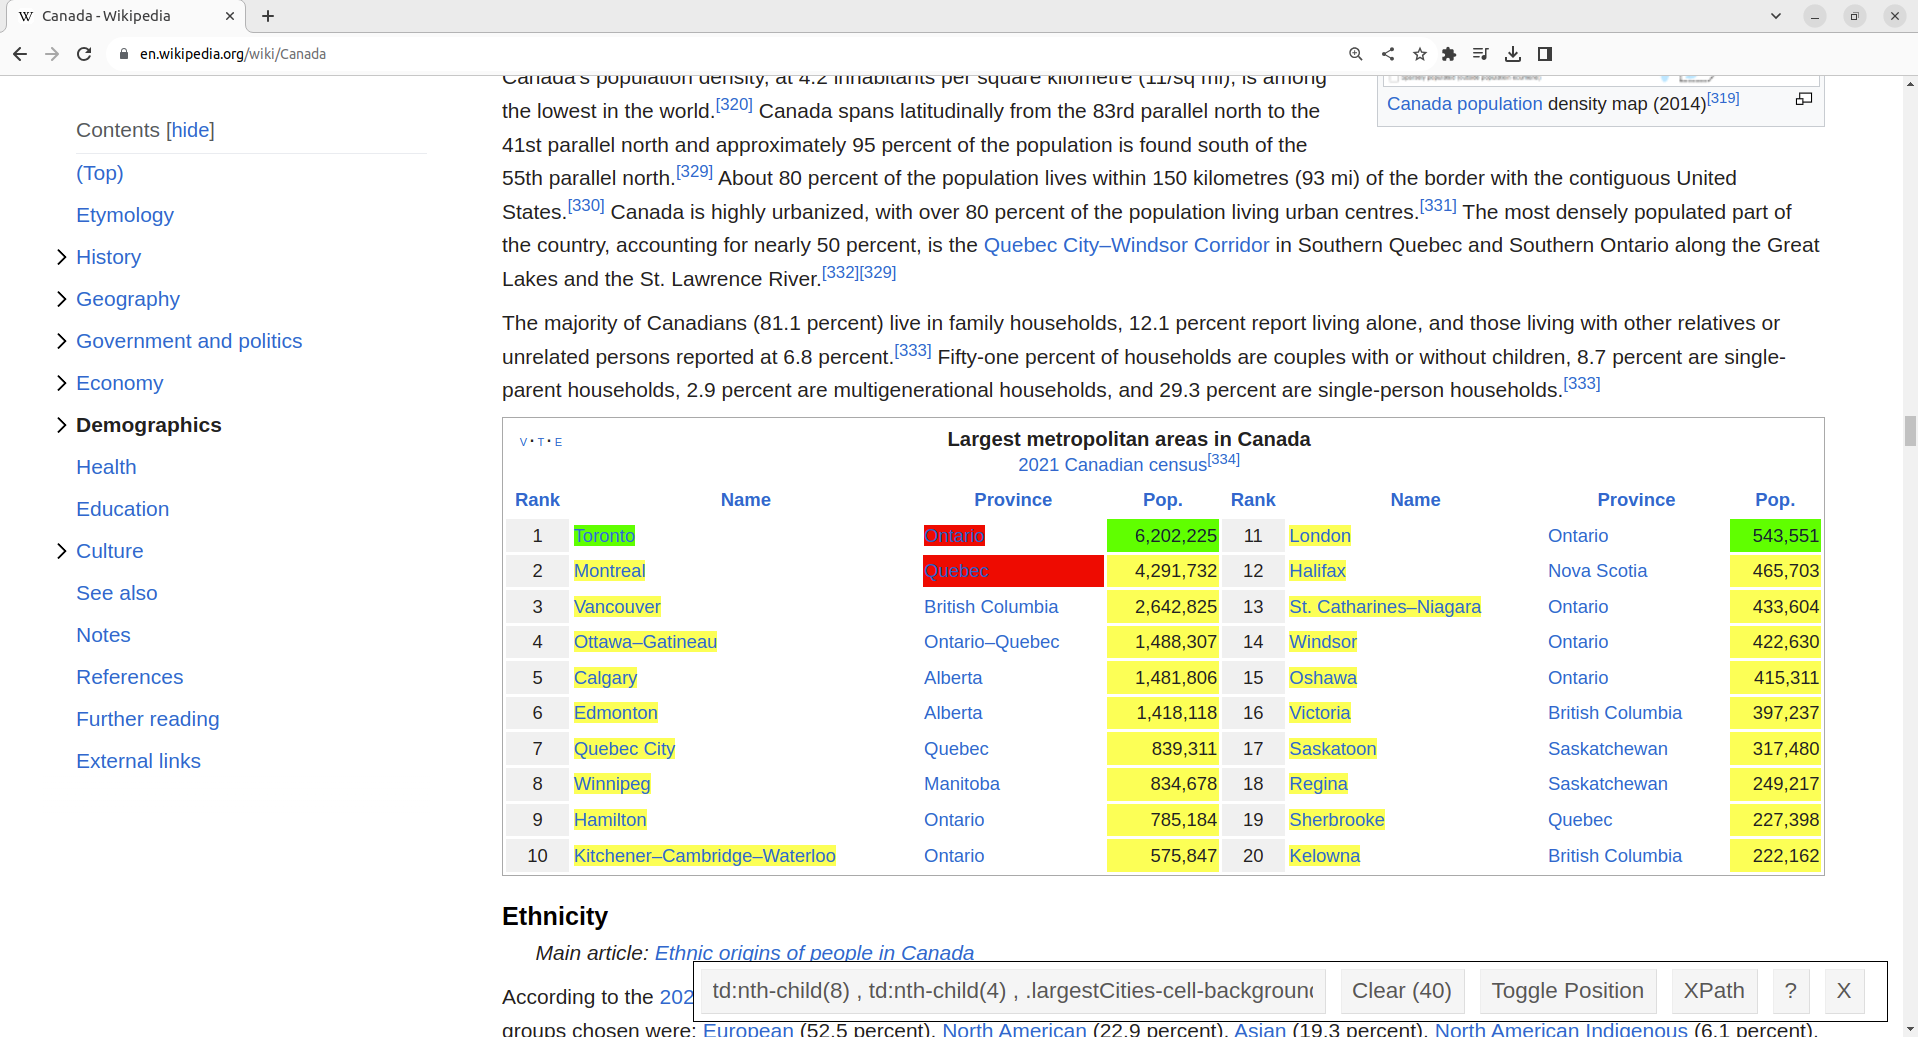 Using the SelectorGadget on a Wikipedia webpage.